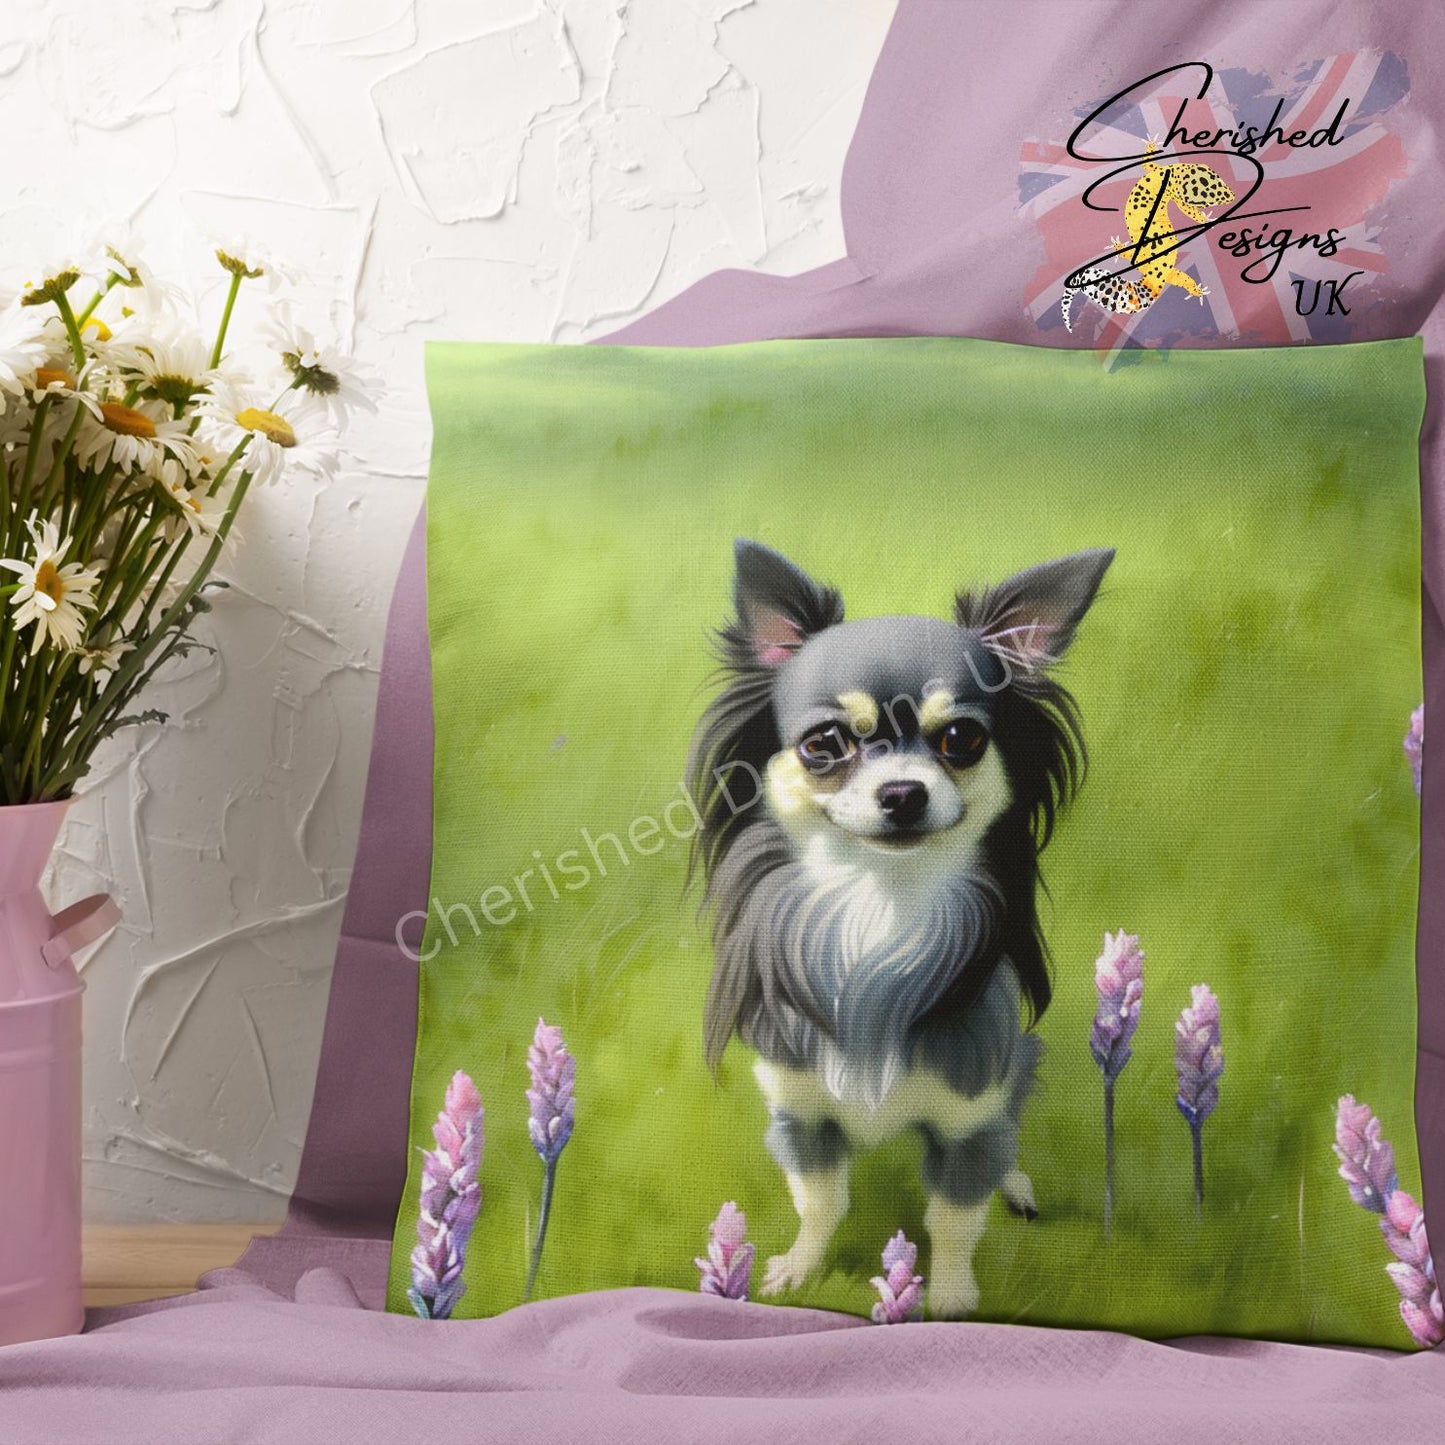 Longhaired Chihuahua pillow